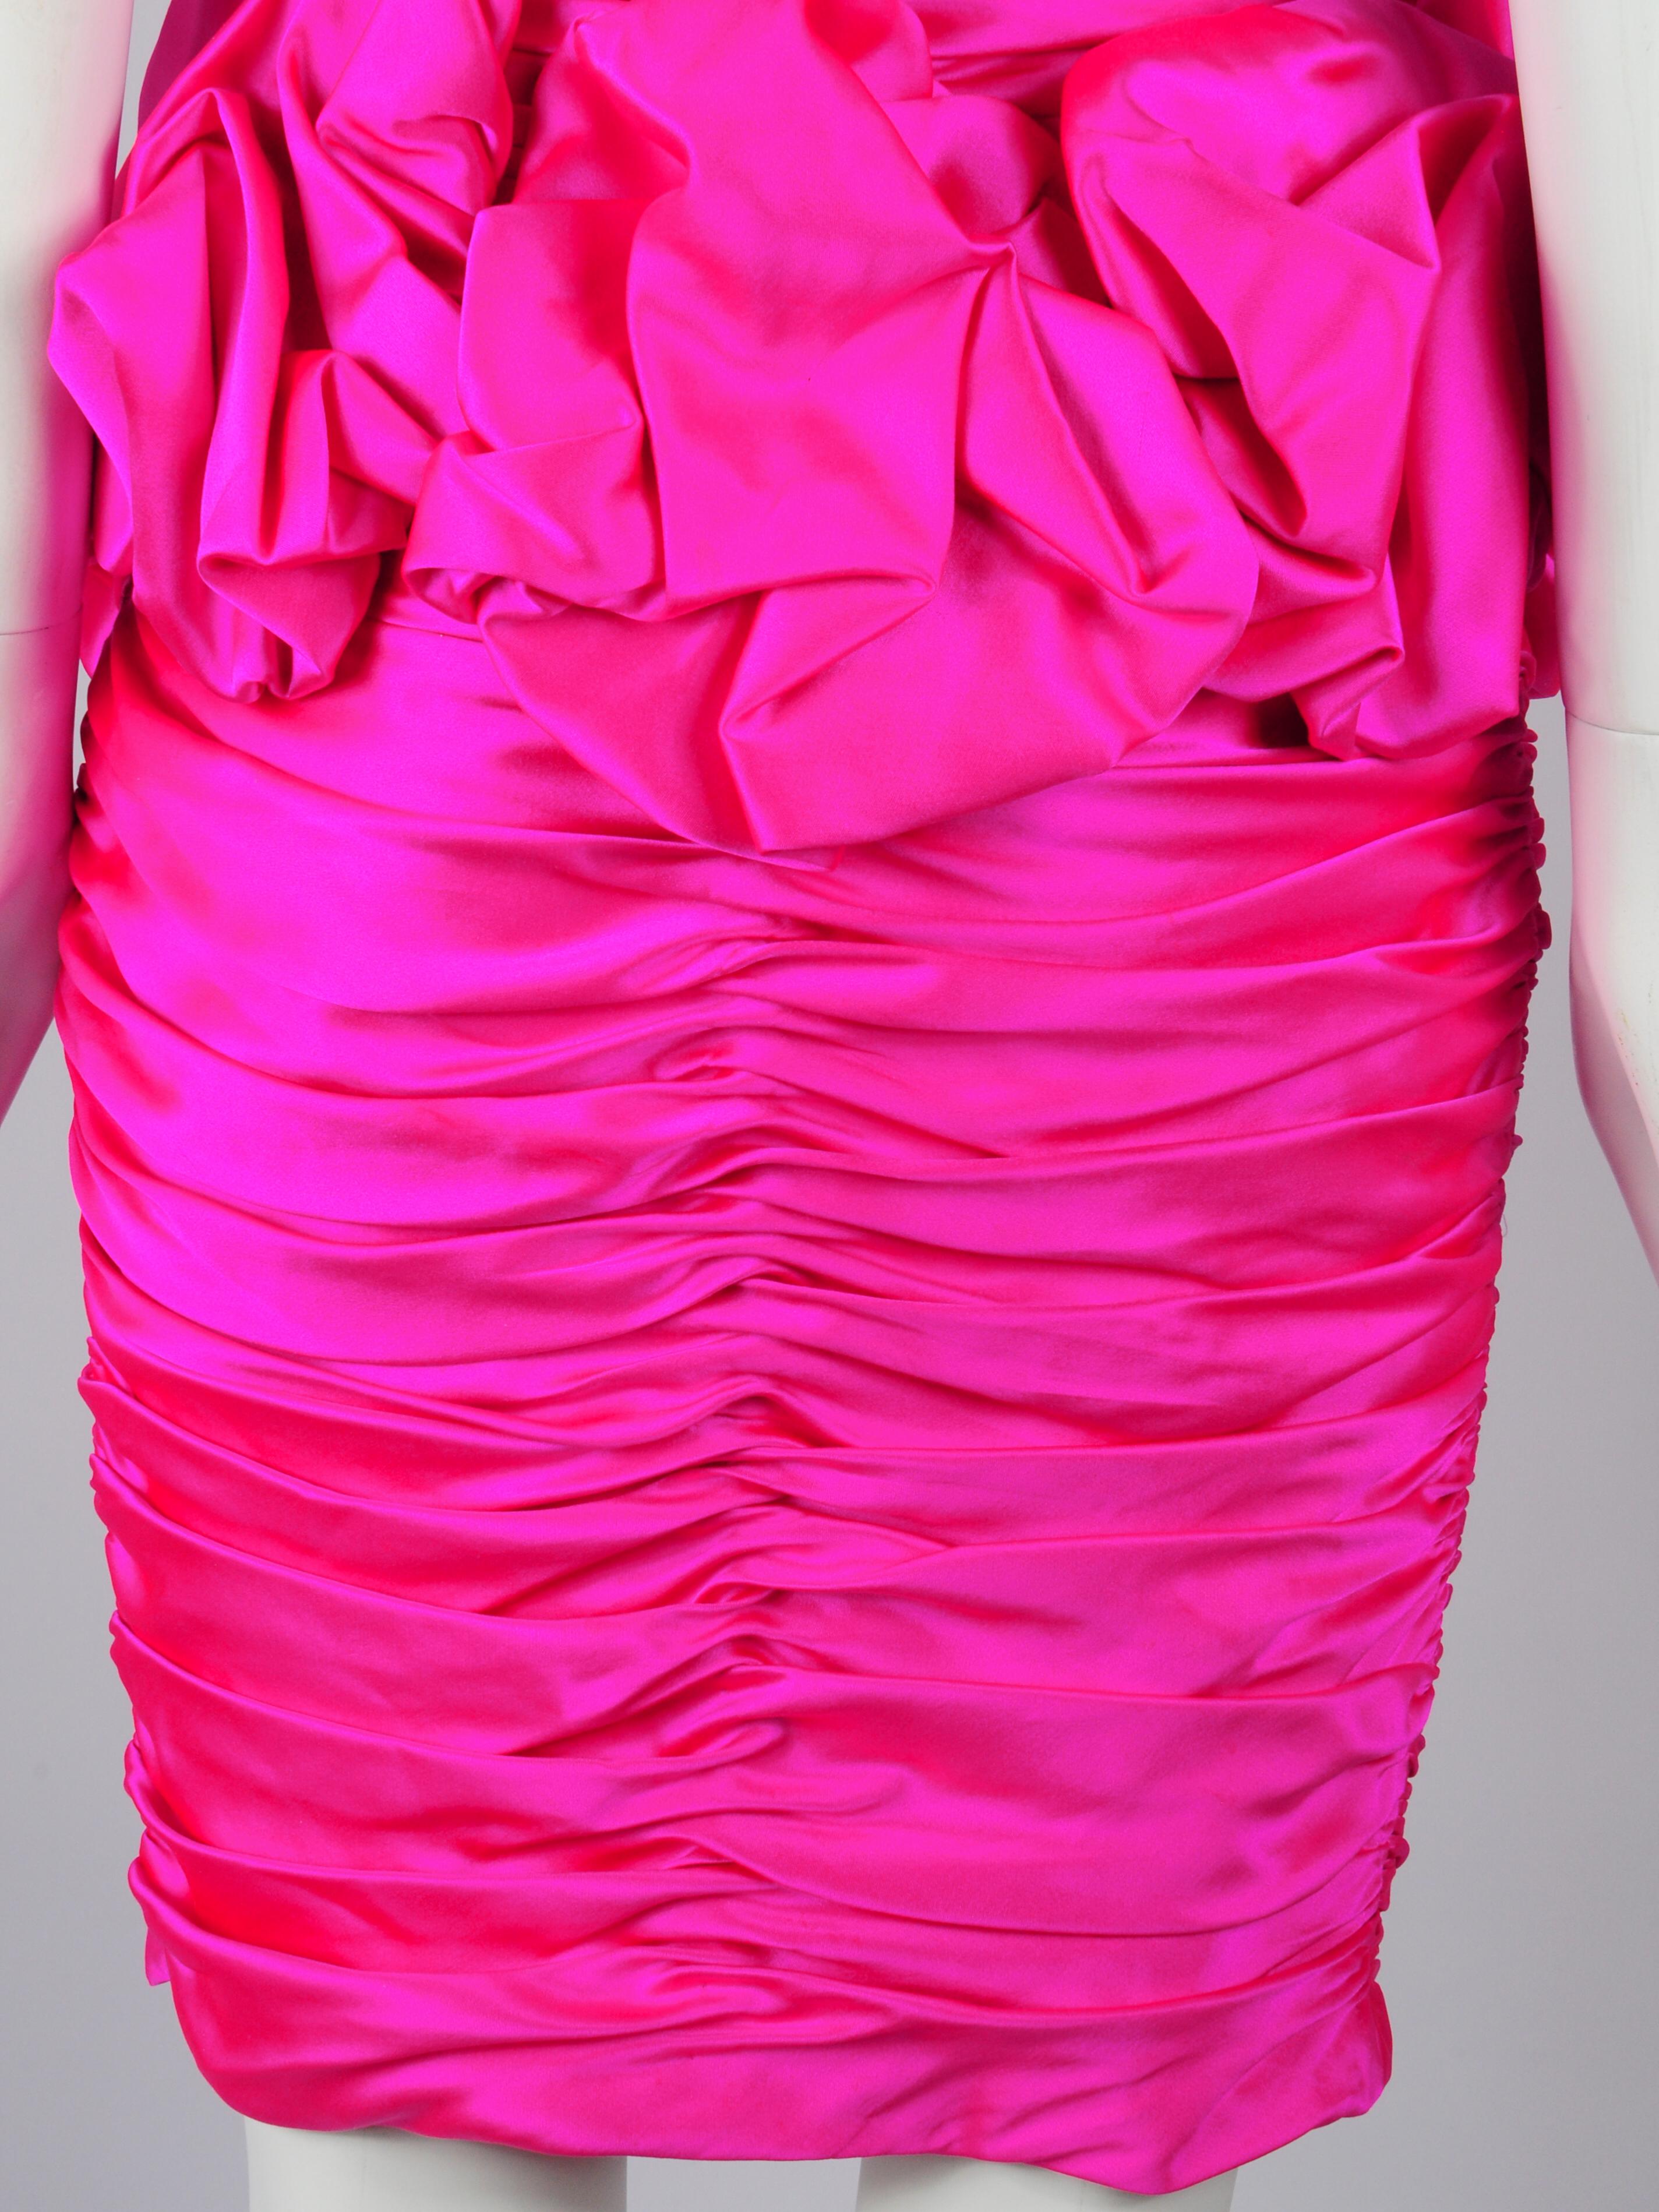 Vicky Tiel Silk Couture Cocktail Dress in Fuchsia Pink 1980s For Sale 7